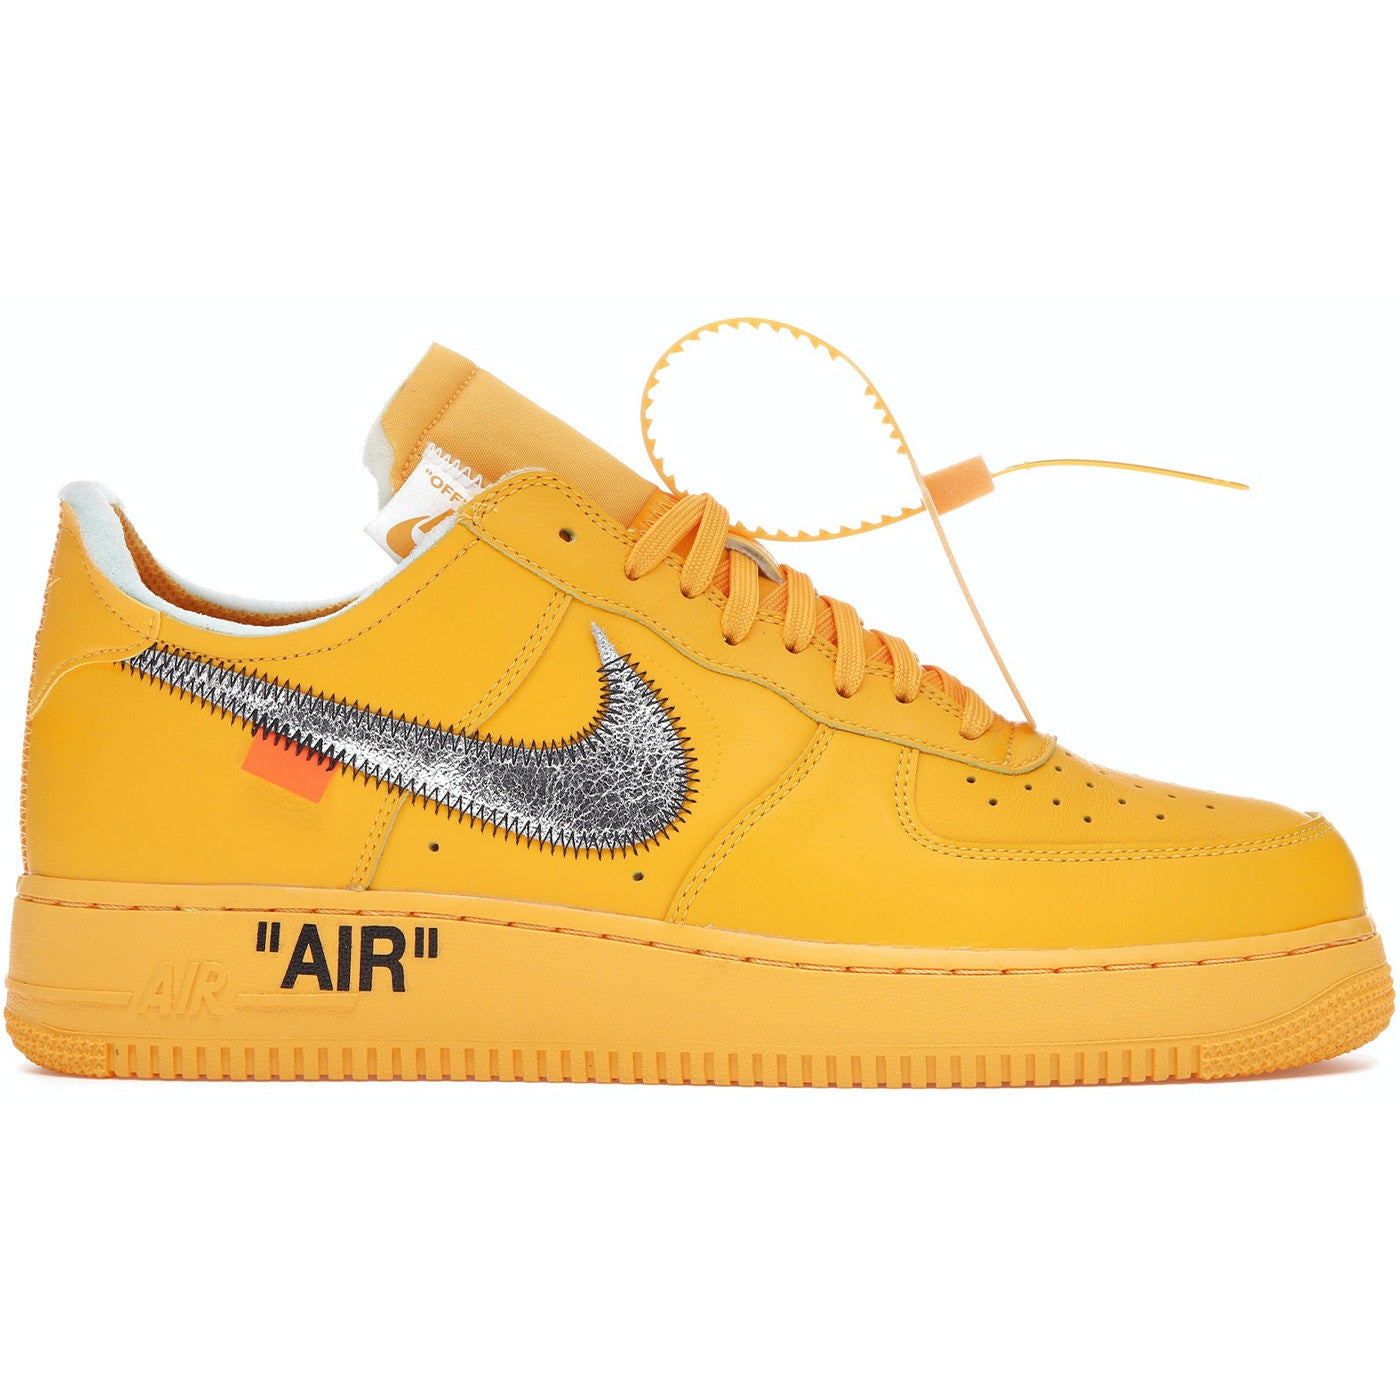 white university gold air force 1